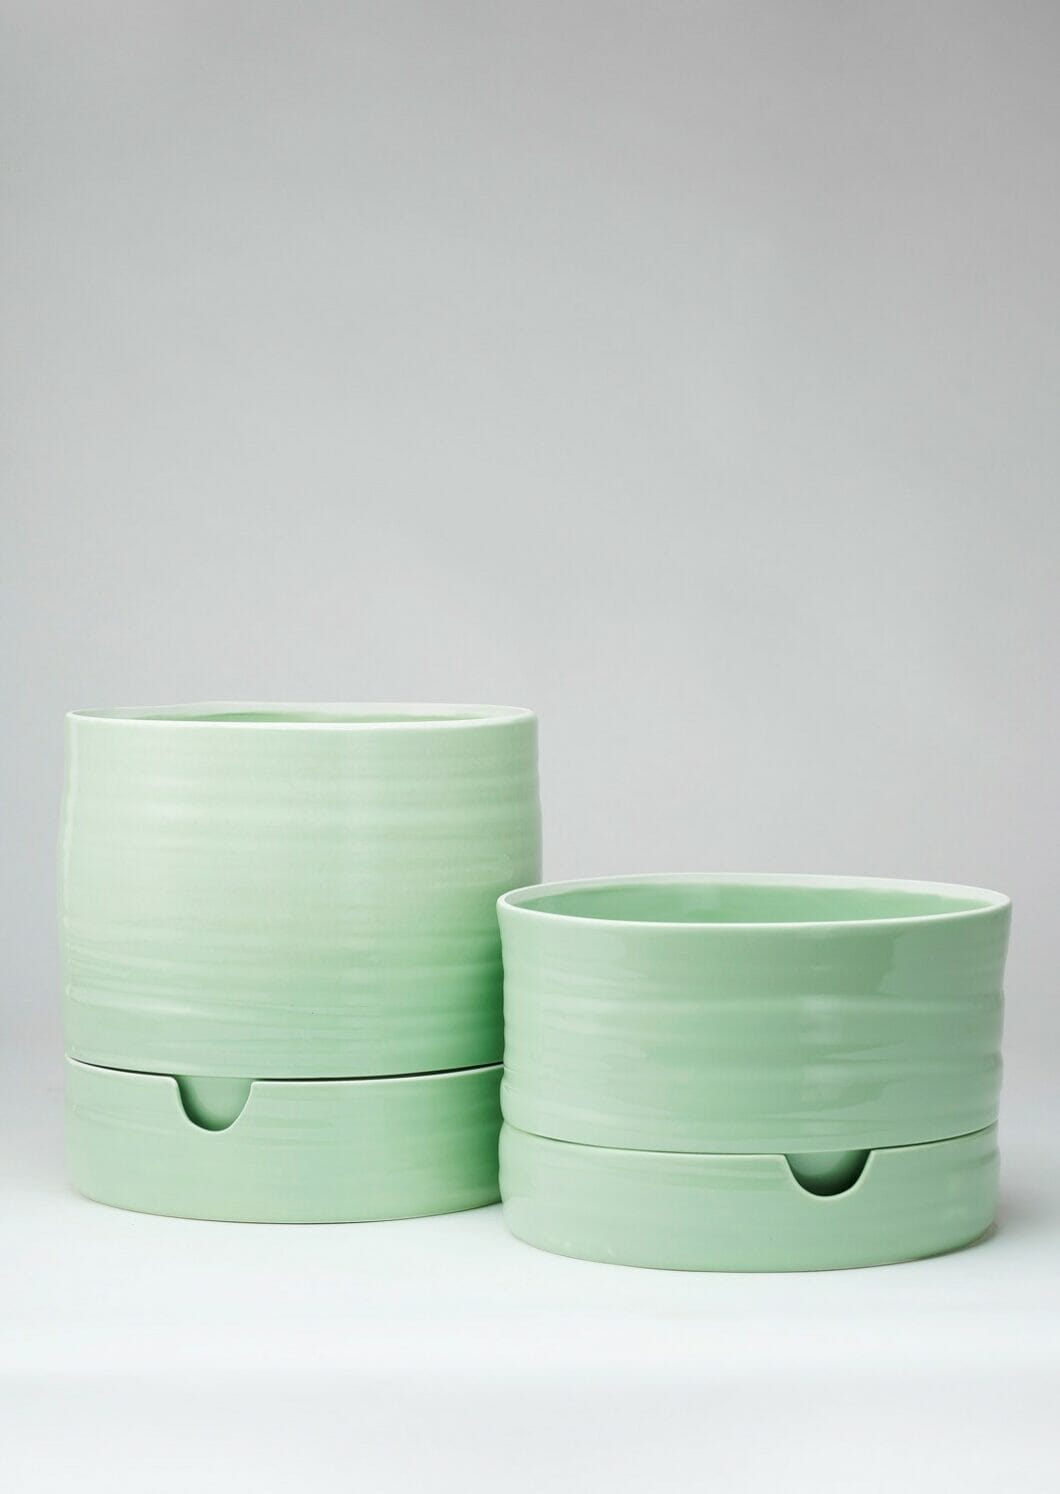 Self Watering Plant Pot Pots angus and Celeste 